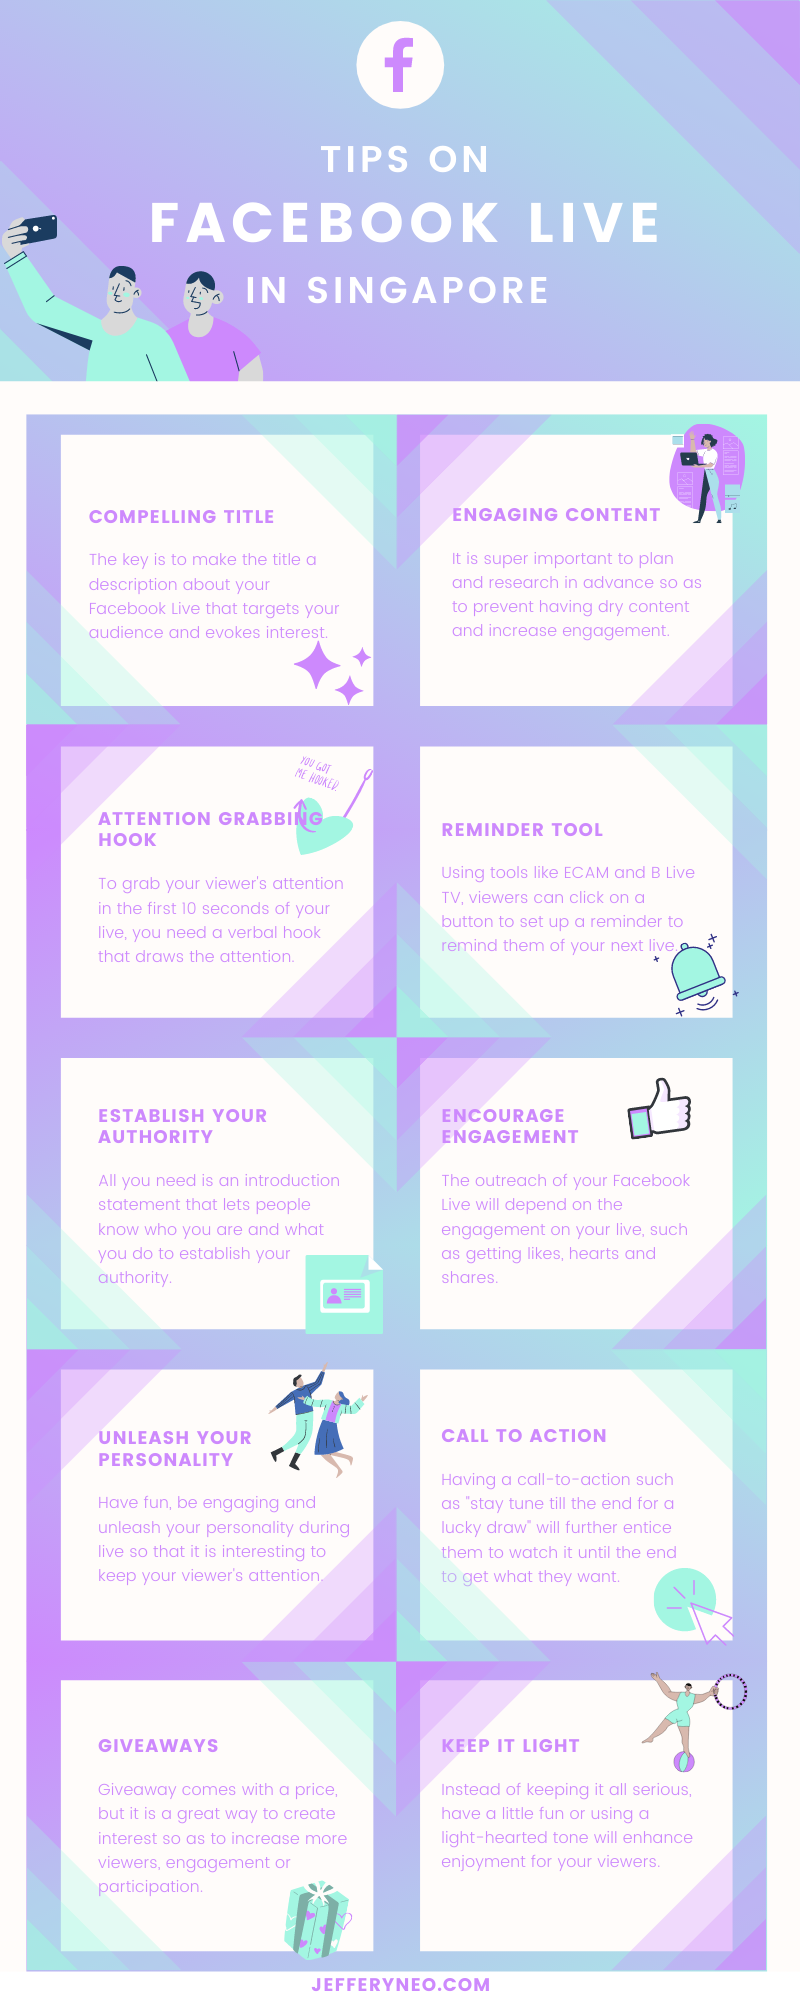 Infographic - Tips on Facebook Live in Singapore